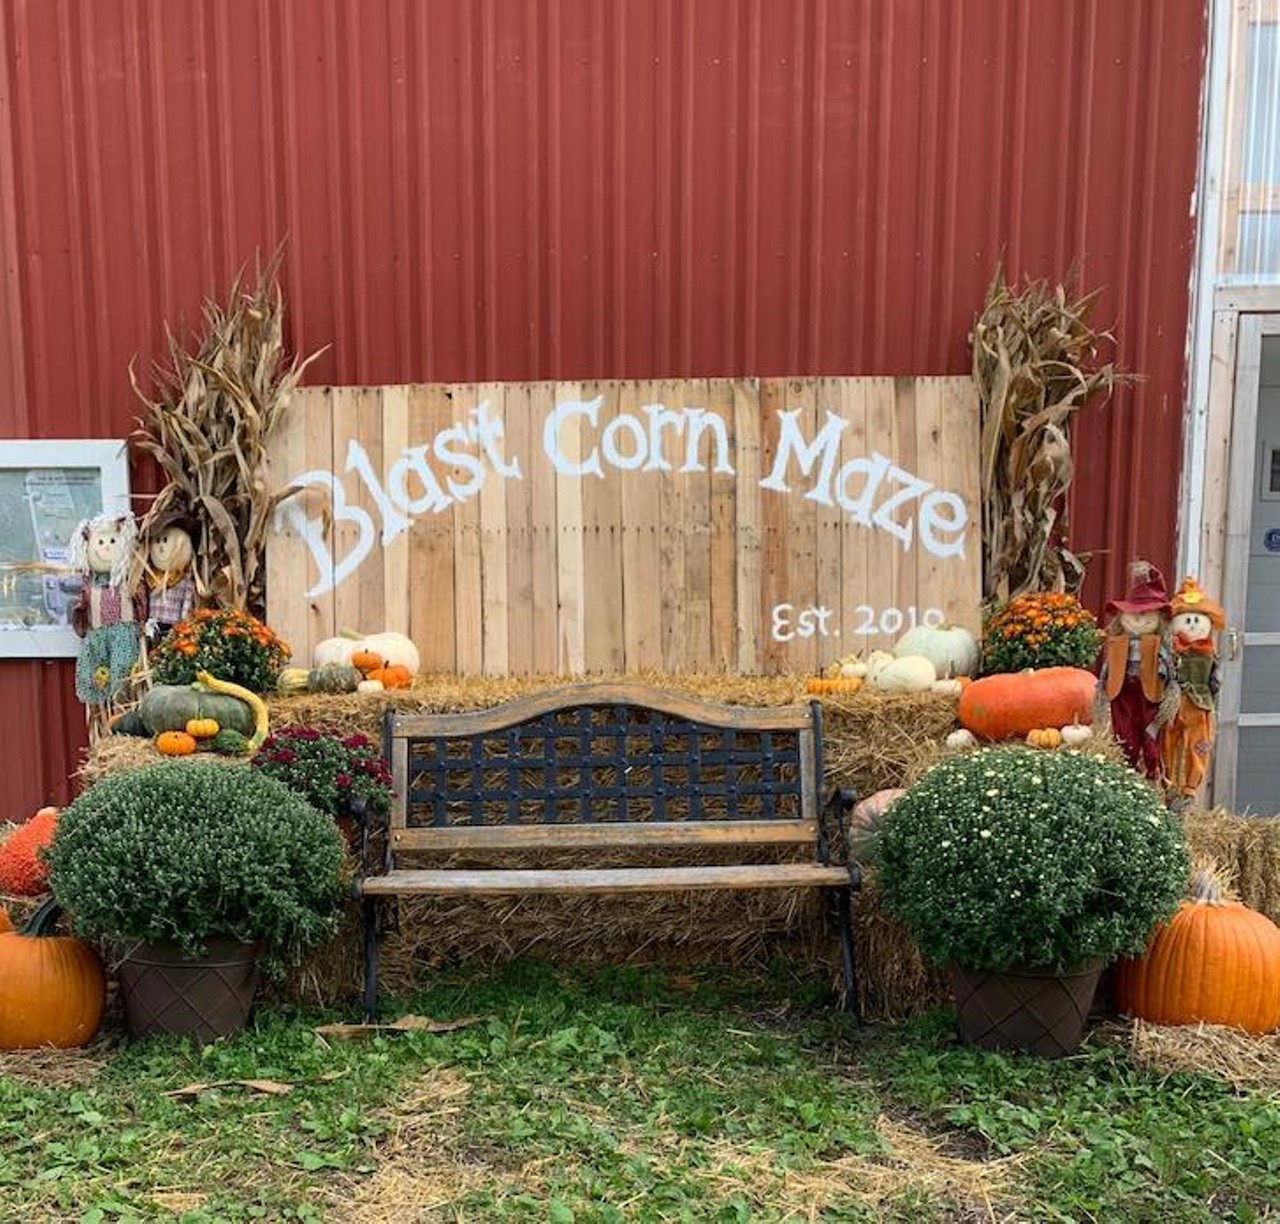 Blast Corn Maze
6175 Daly Rd., Dexter; 734-845-7127; blastcornmaze.com
You&#146;re guaranteed to have a blast at The Blast Corn Maze. The fun doesn&#146;t stop in the corn field, quench your thirst with a cool cider slush or warm up by a fire pit.
Photo via The Blast Corn Maze/Facebook